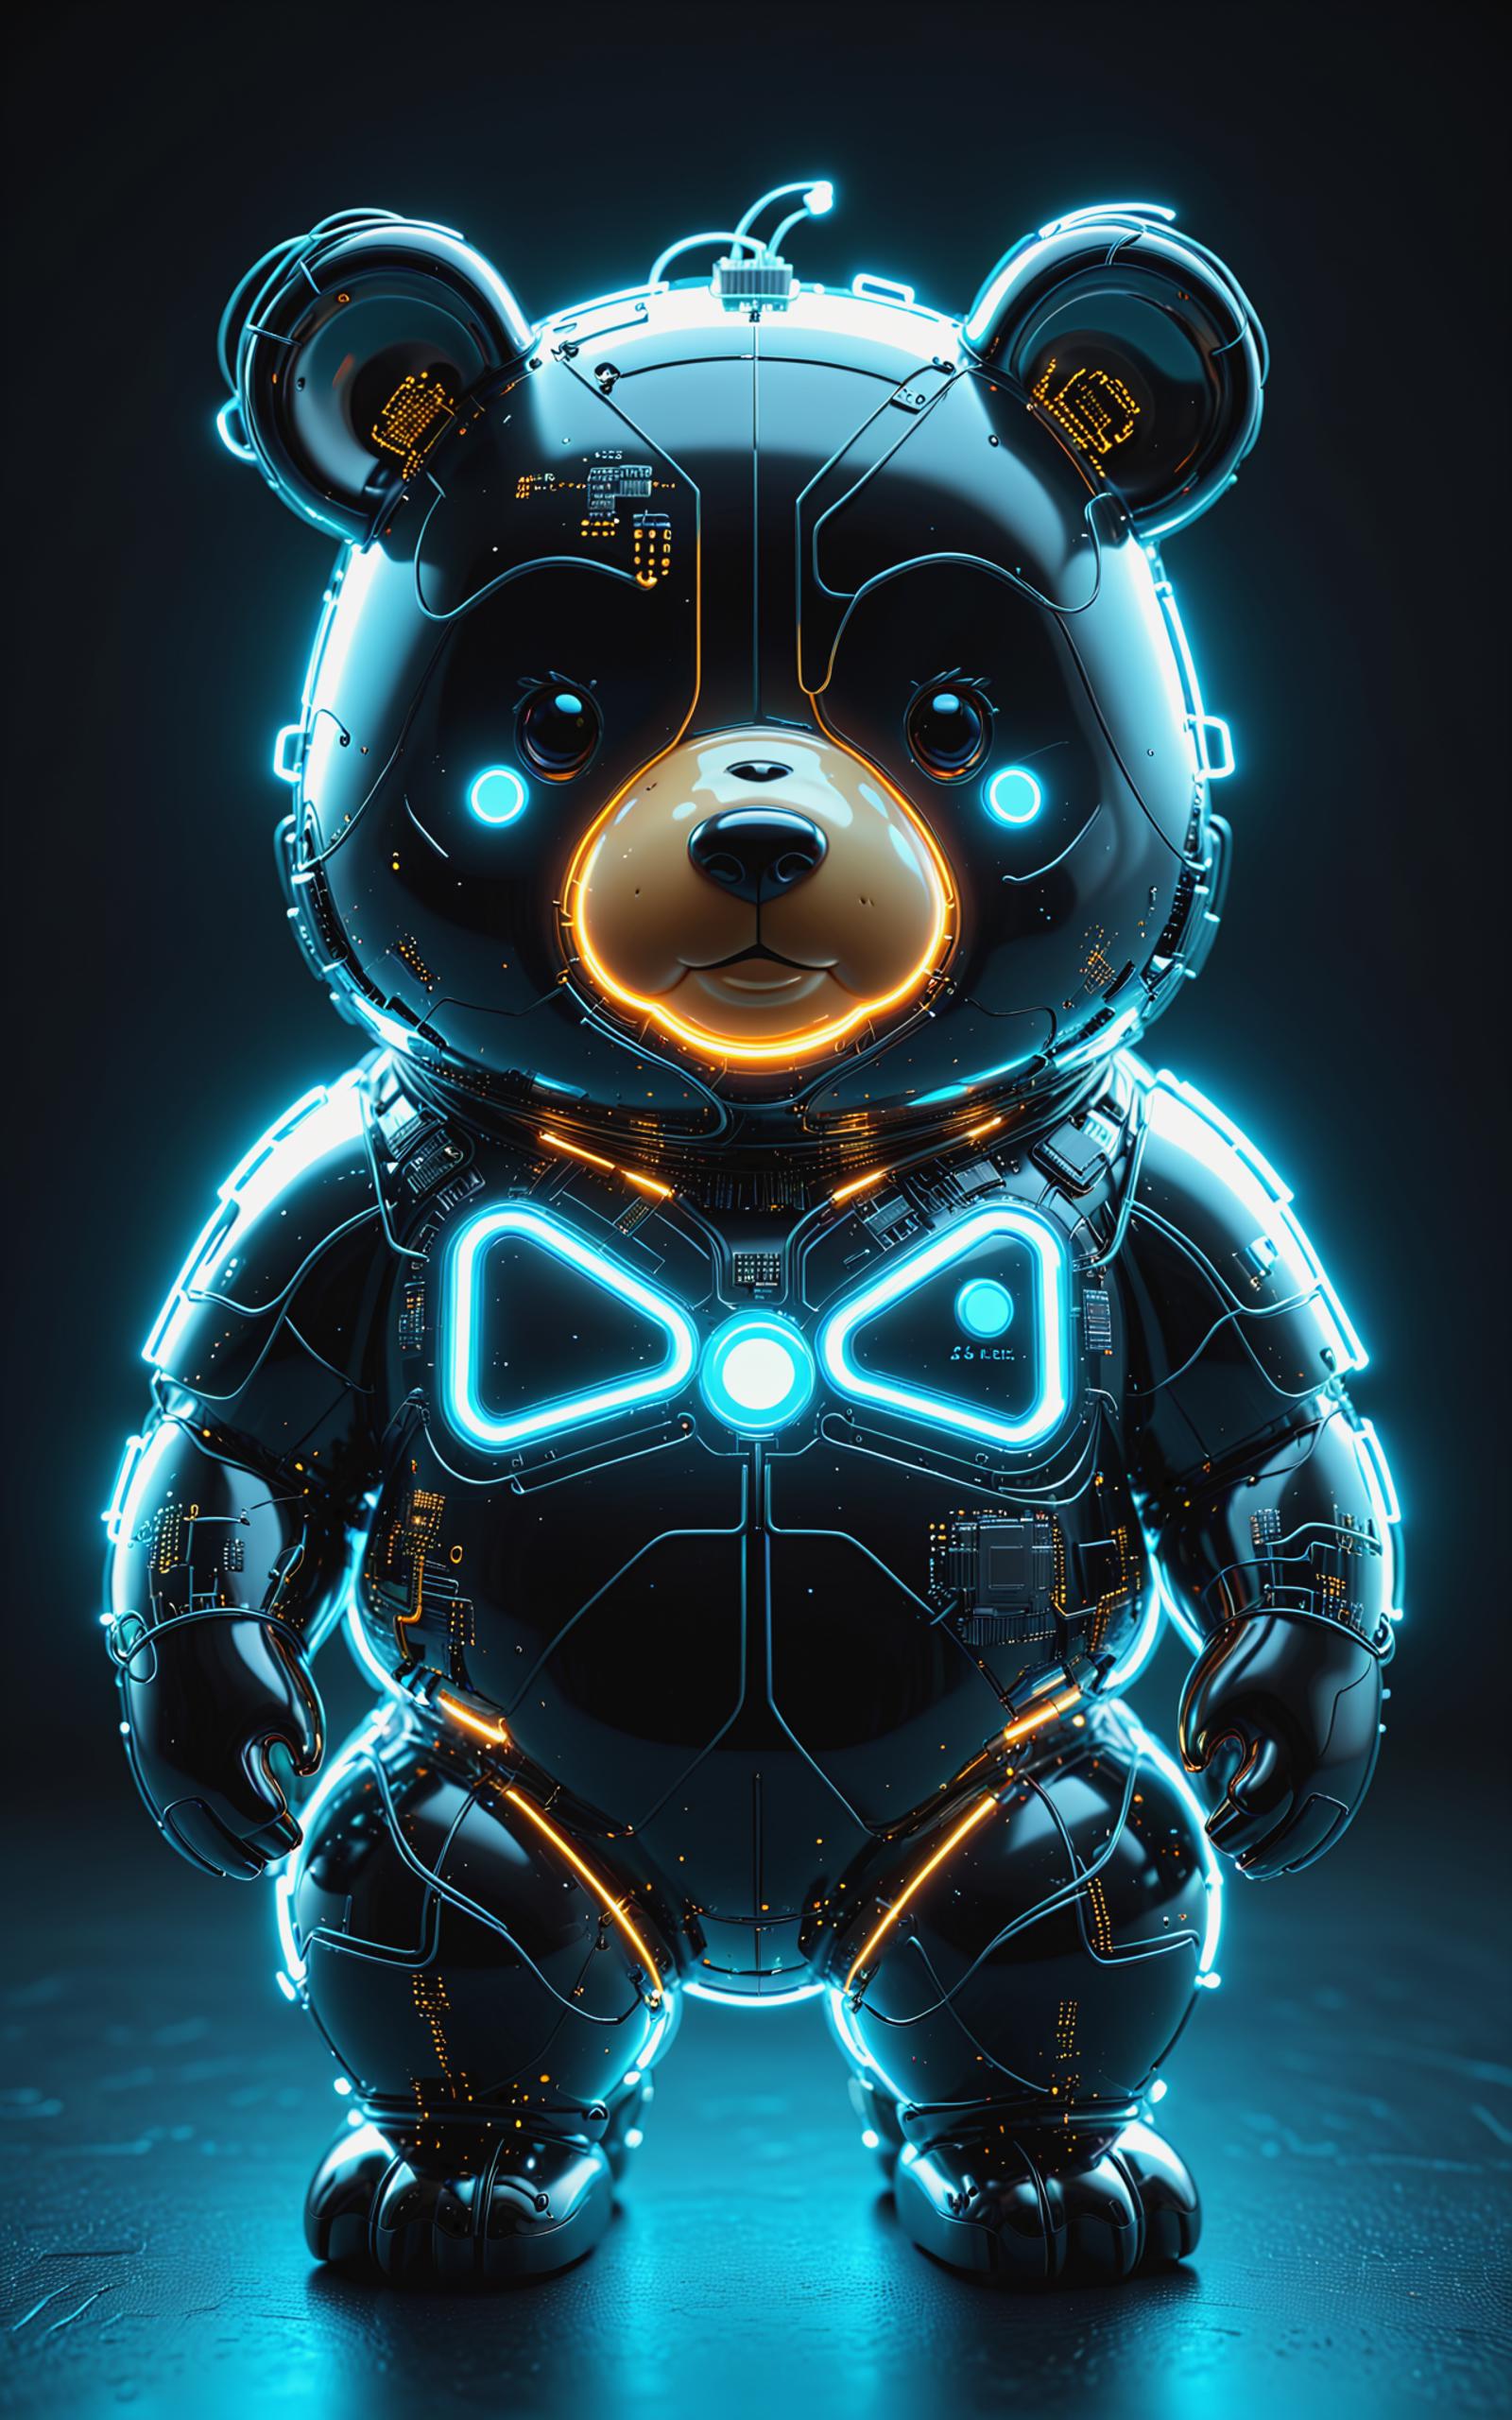 A futuristic robot teddy bear with a bow tie and blue lights.